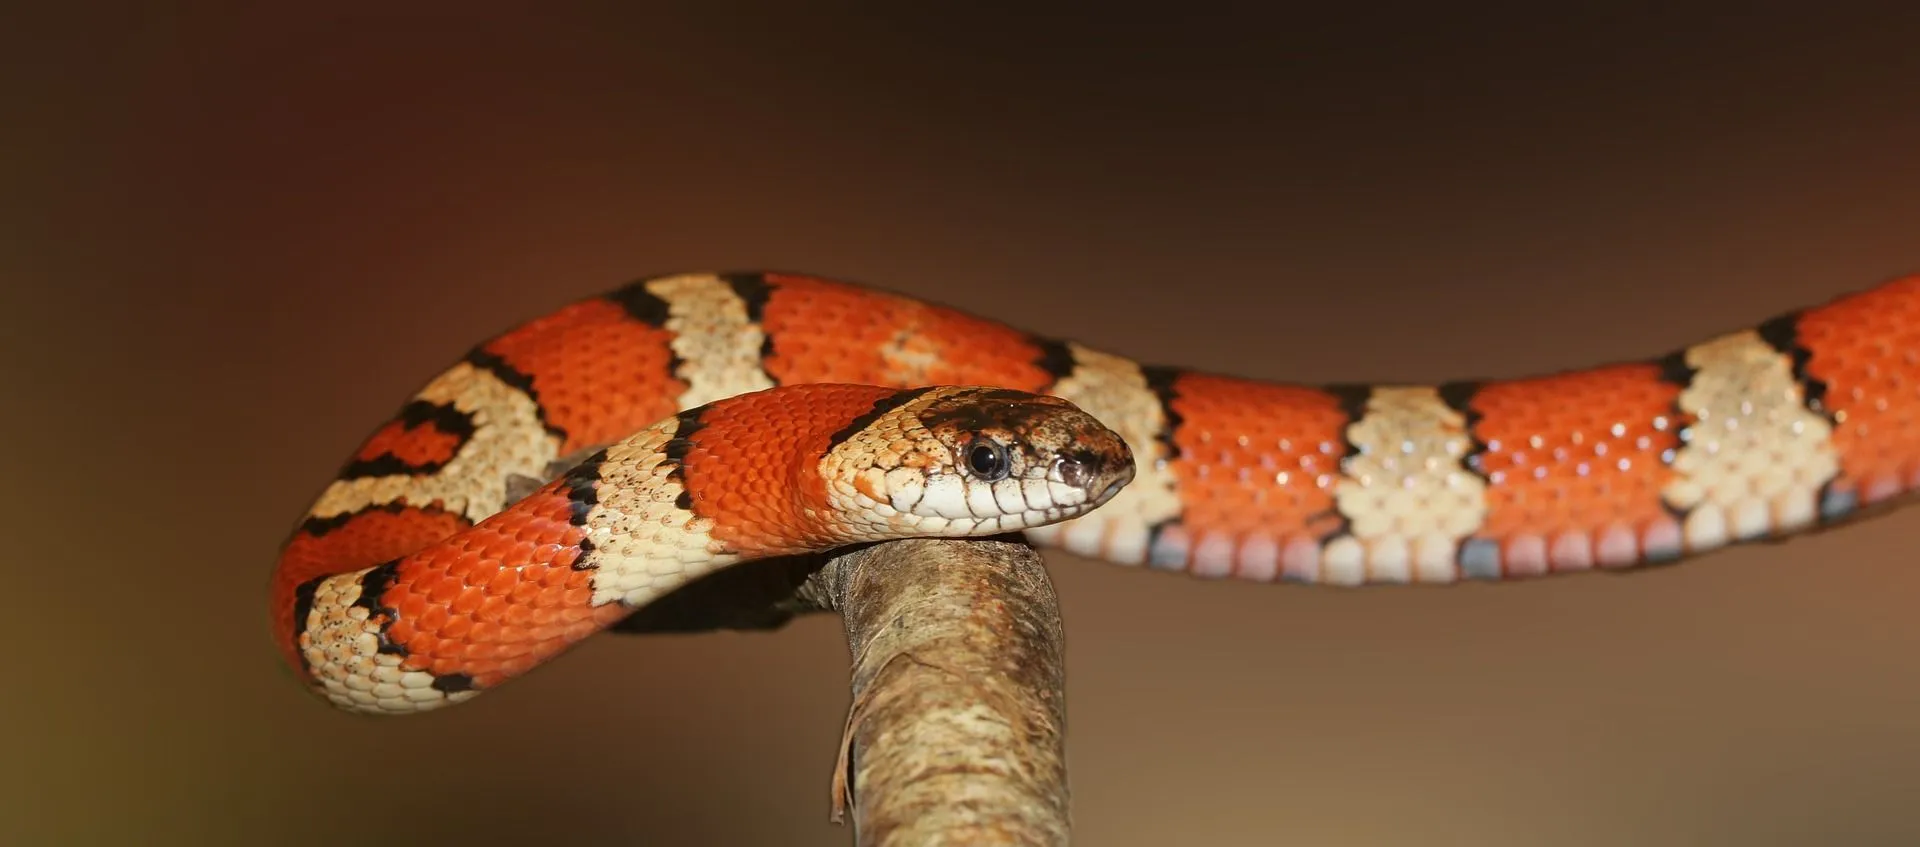 Experts can easily distinguish between a coral snake and a harmless kingsnake.